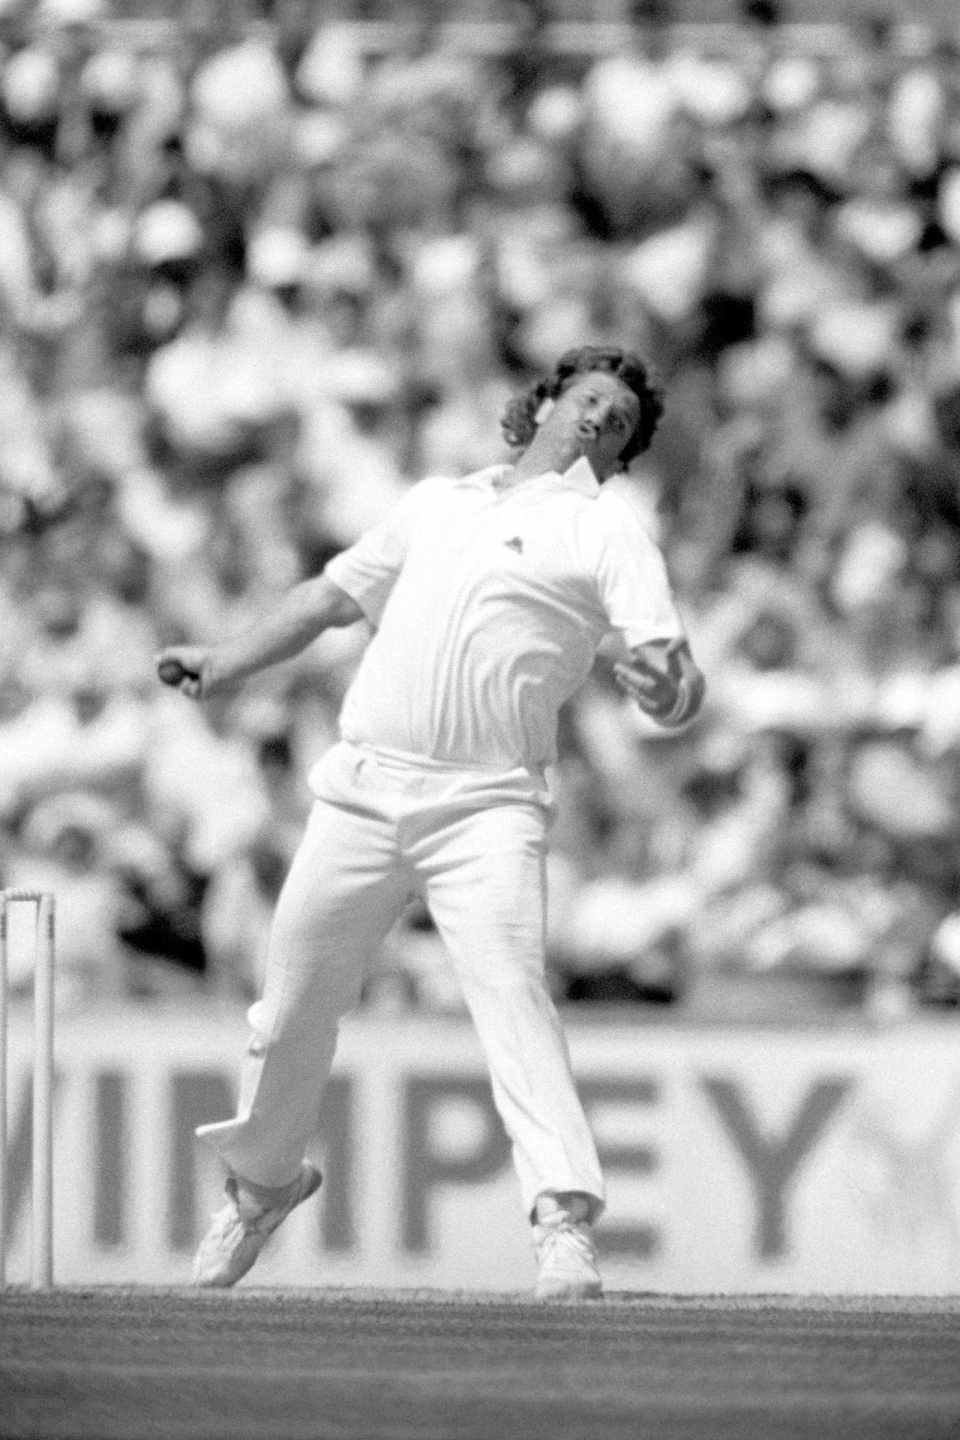 Pakistan had made 708 in the first innings before Abdul Qadir's spell of 7 for 96 restricted England to 232 at The Oval in 1987